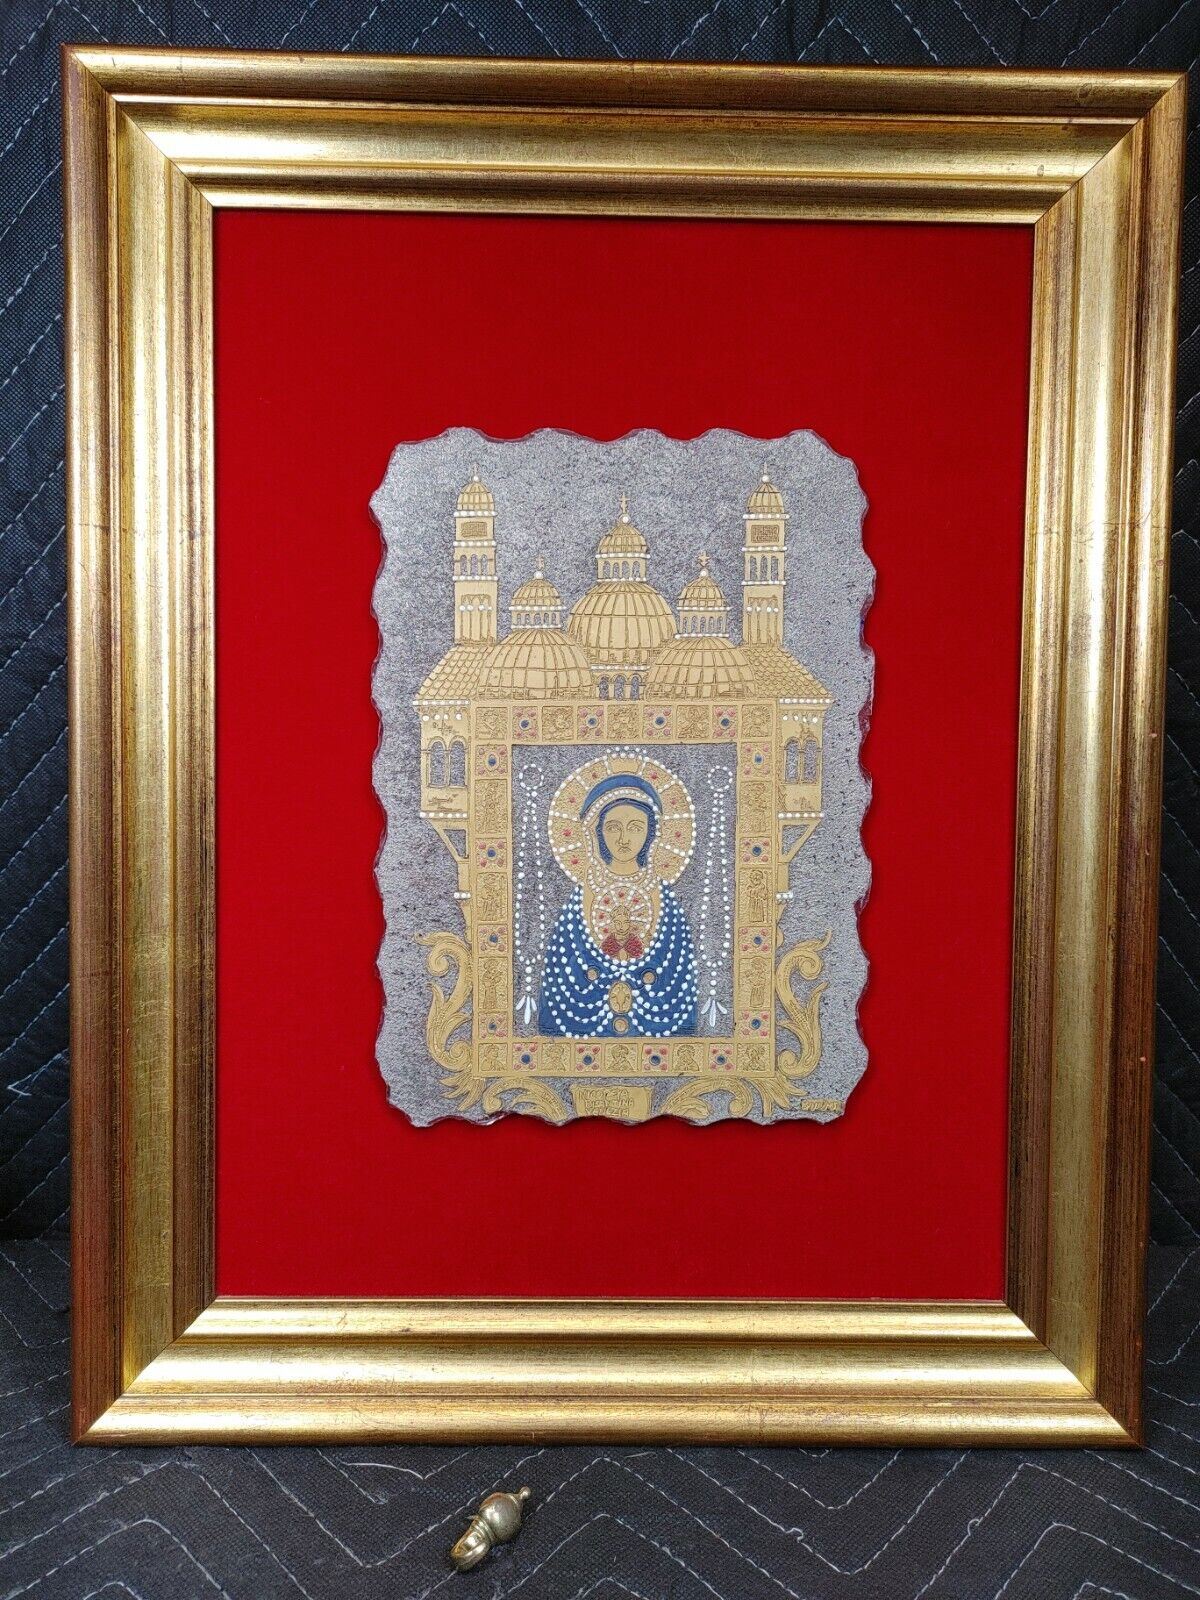 Bruber - Madonna & Child, Chiseled Crystal, Painted Gold Platinum Murano Venice